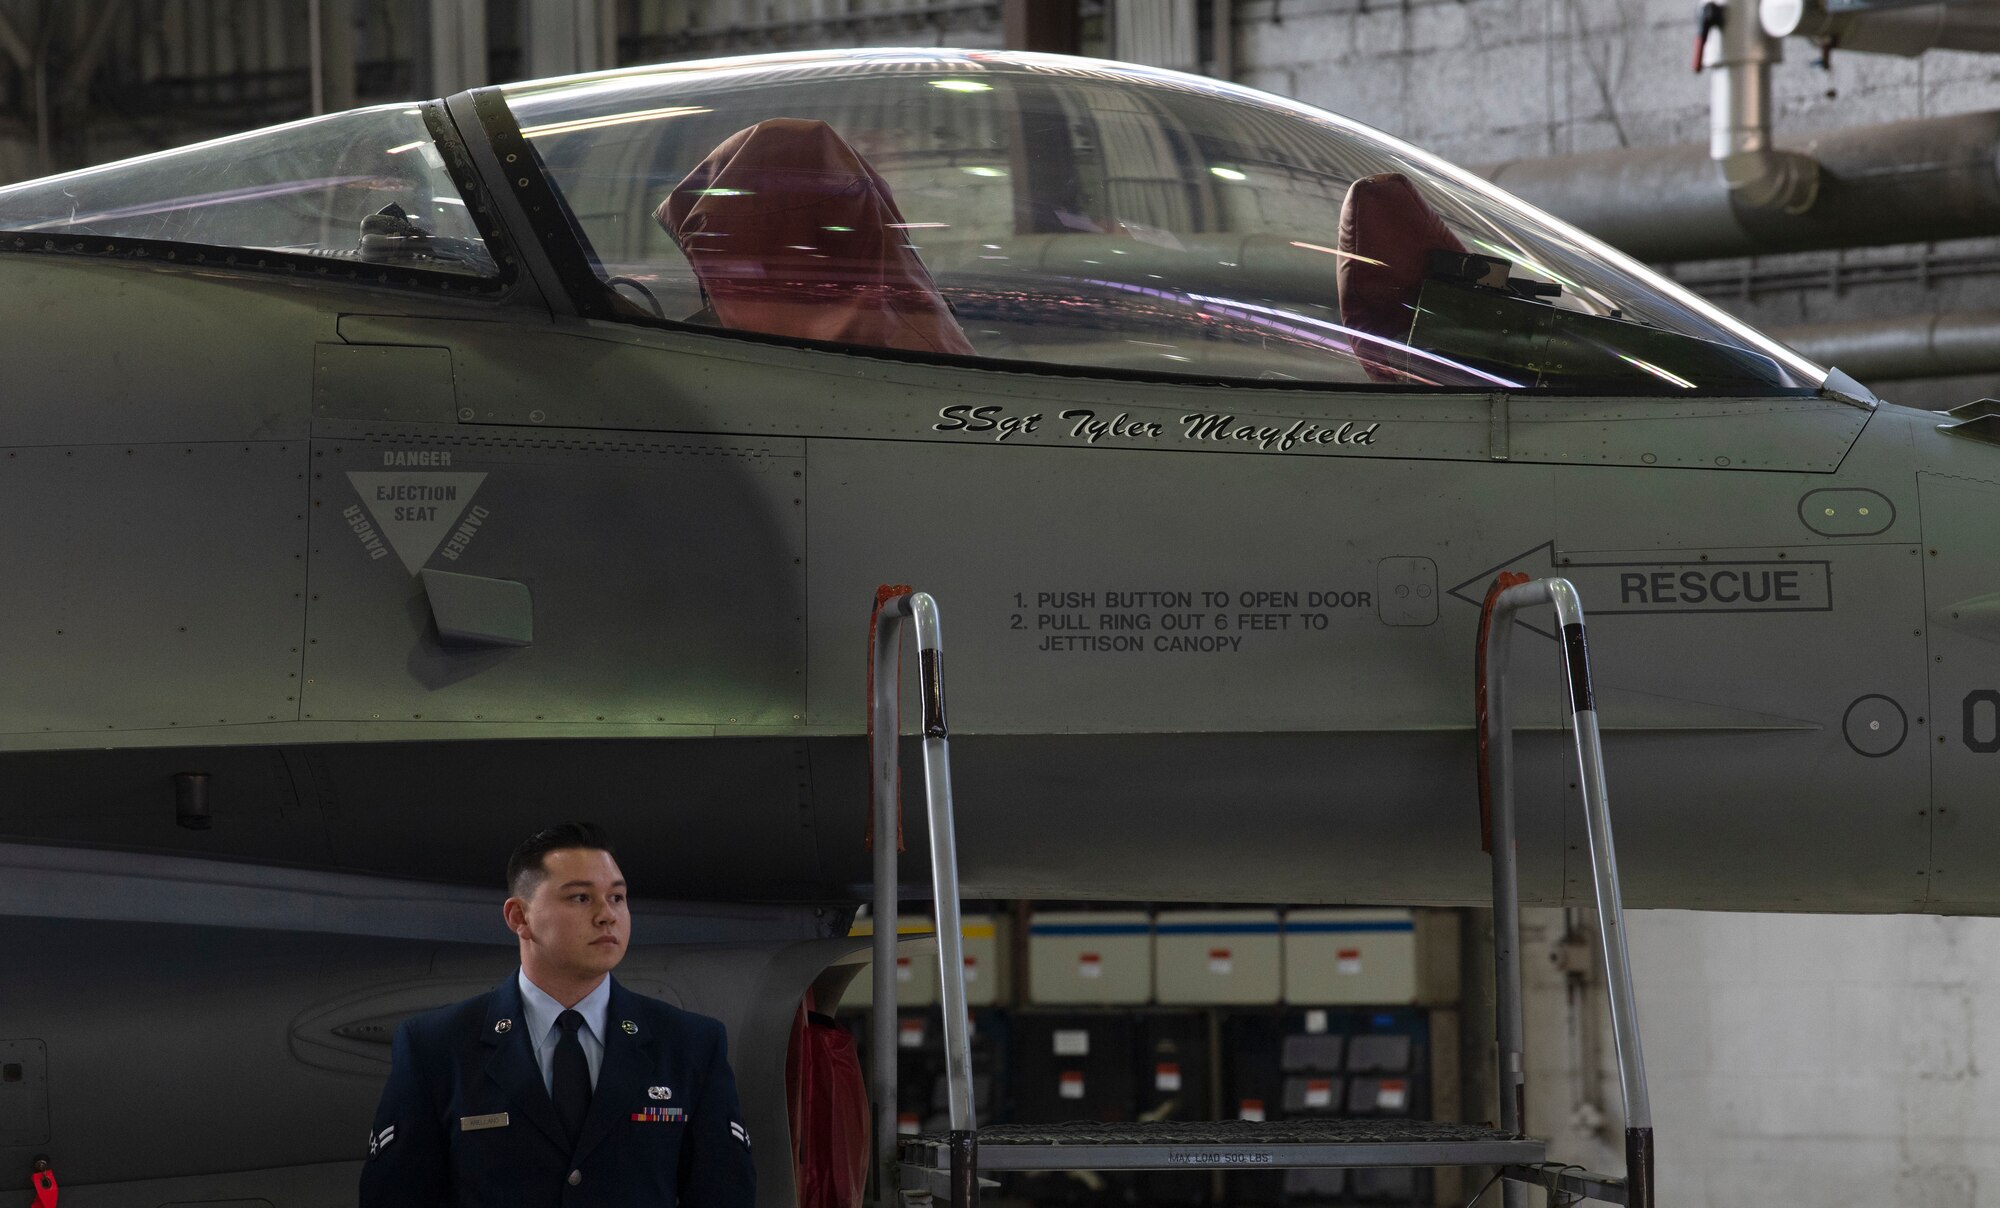 Mayfield passed away following a car incident in route to his next duty location. The 52nd Aircraft Maintenance Squadron unveiled Mayfield's name on the side of an F-16 Fighting Falcon to commemorate the hard work and dedication Mayfield showed while at Spangdahlem AB